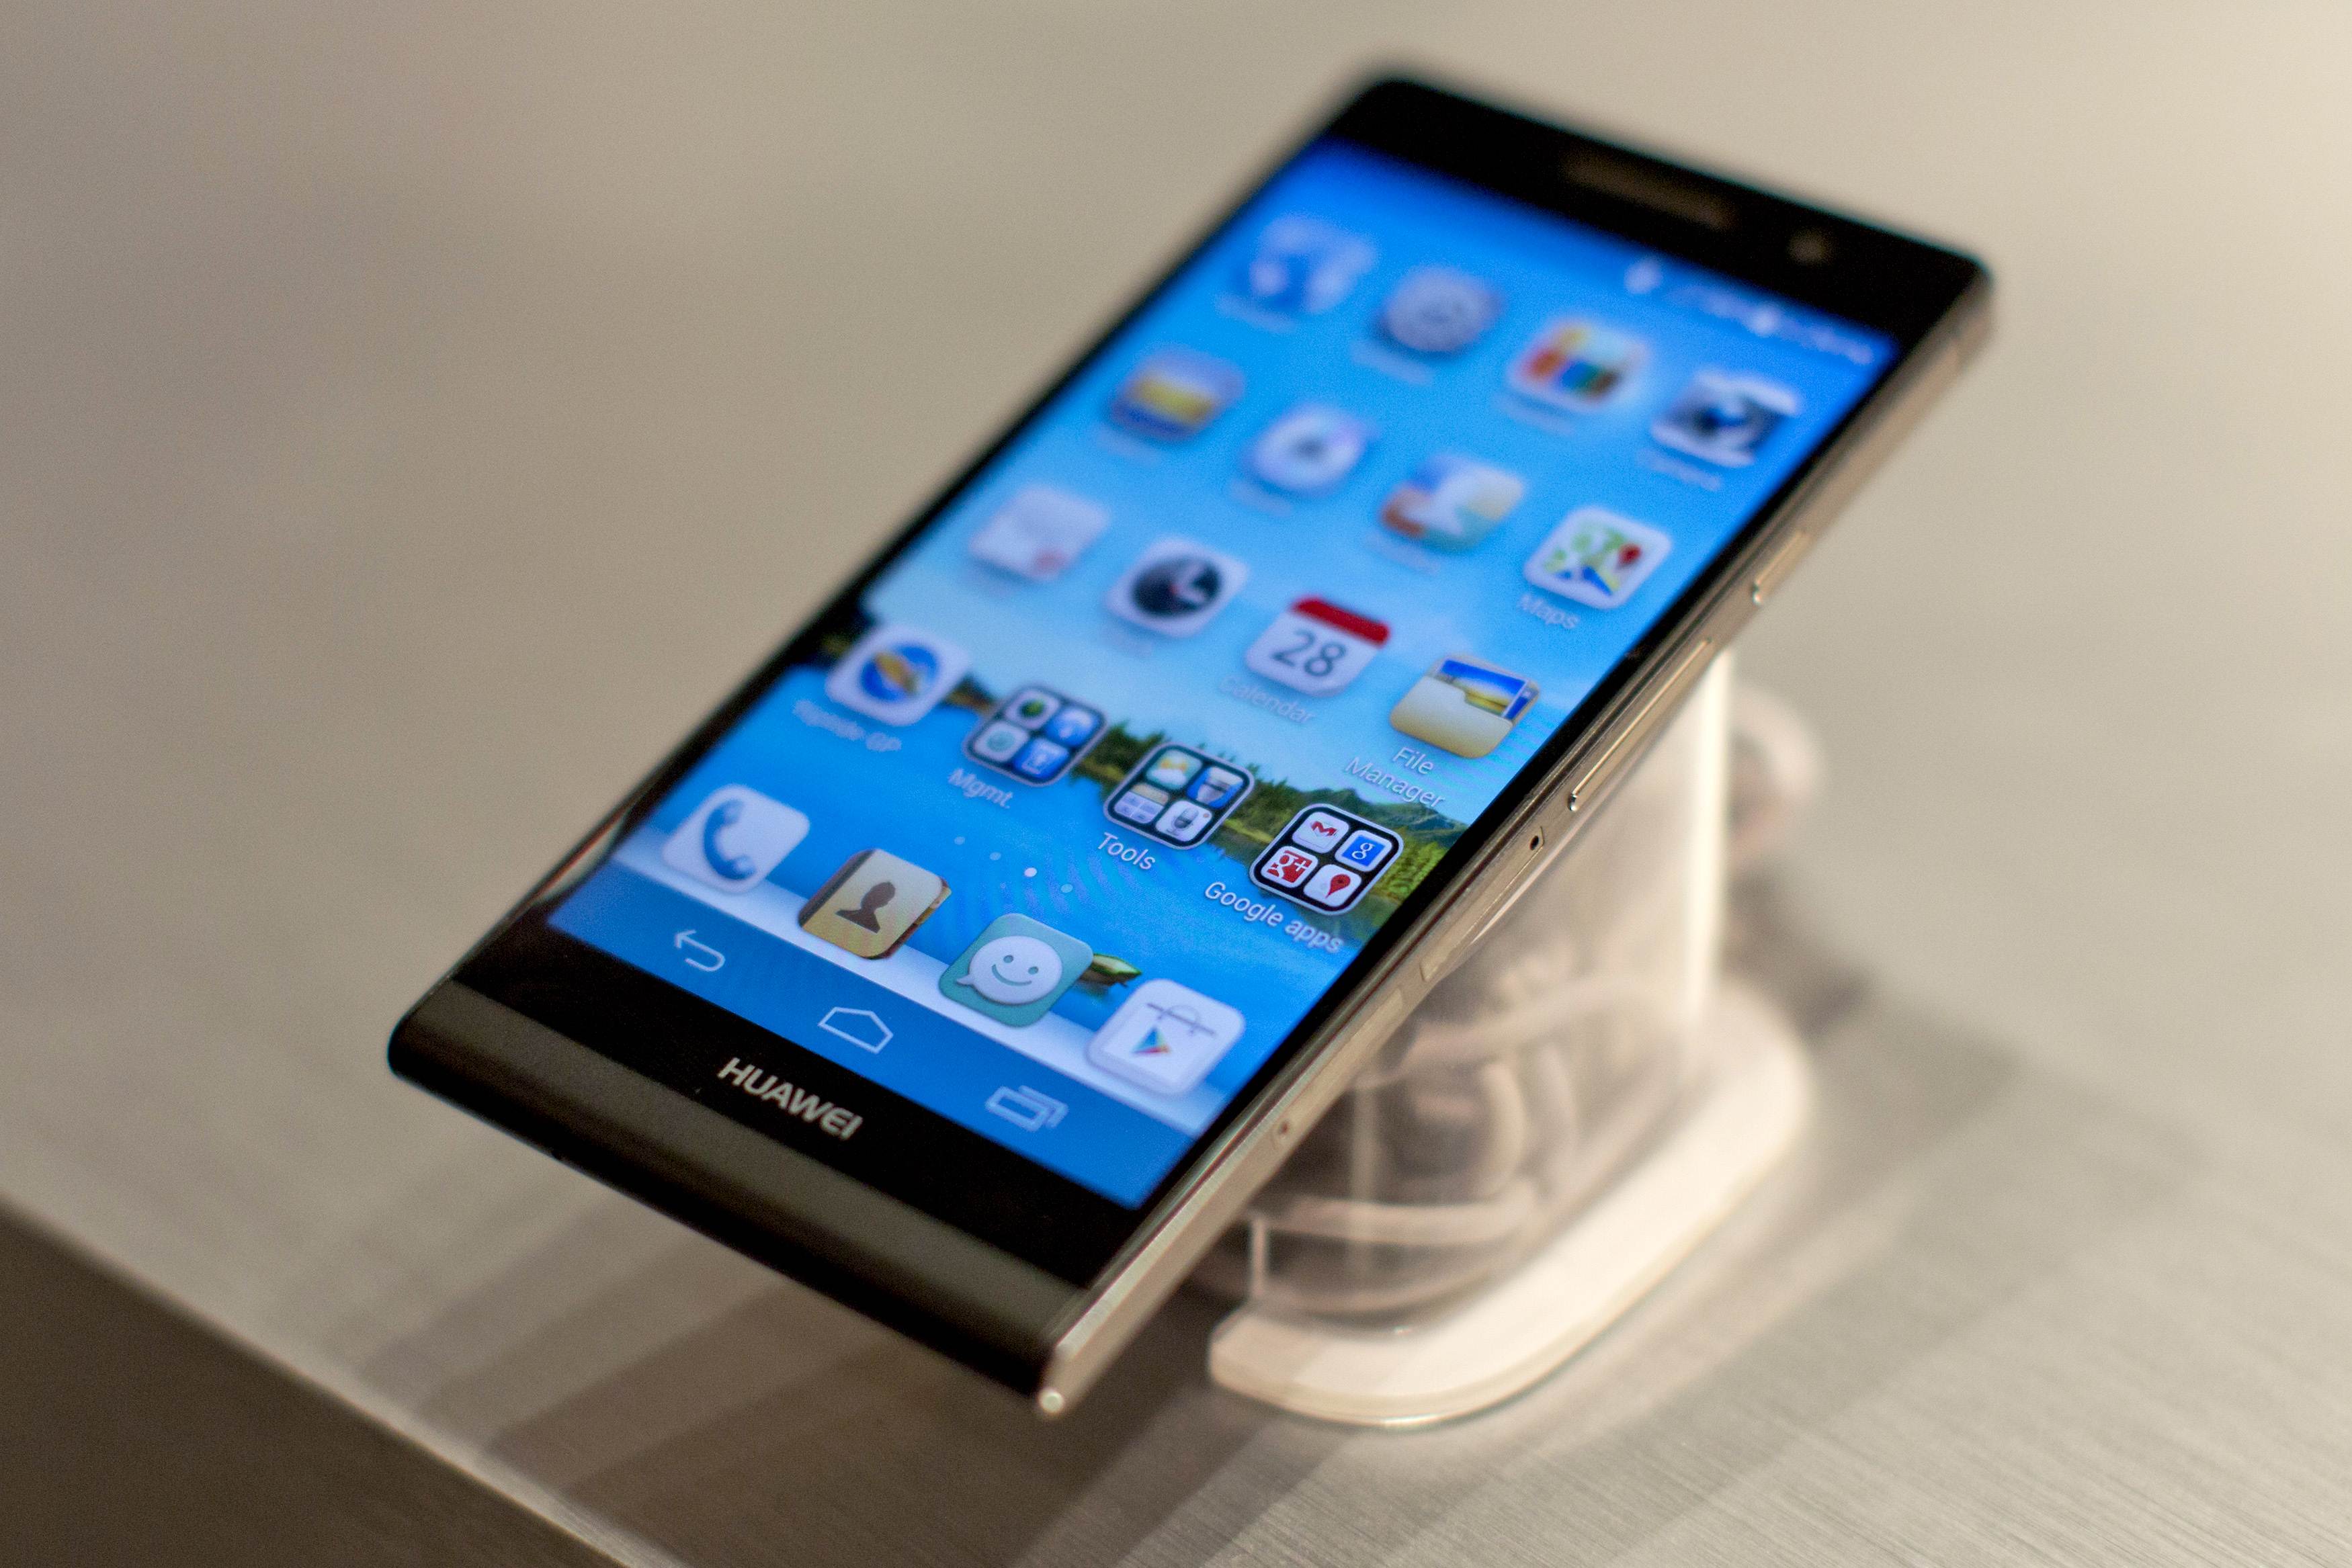 The new Huawei Ascend P6 smartphone. Photo: AFP